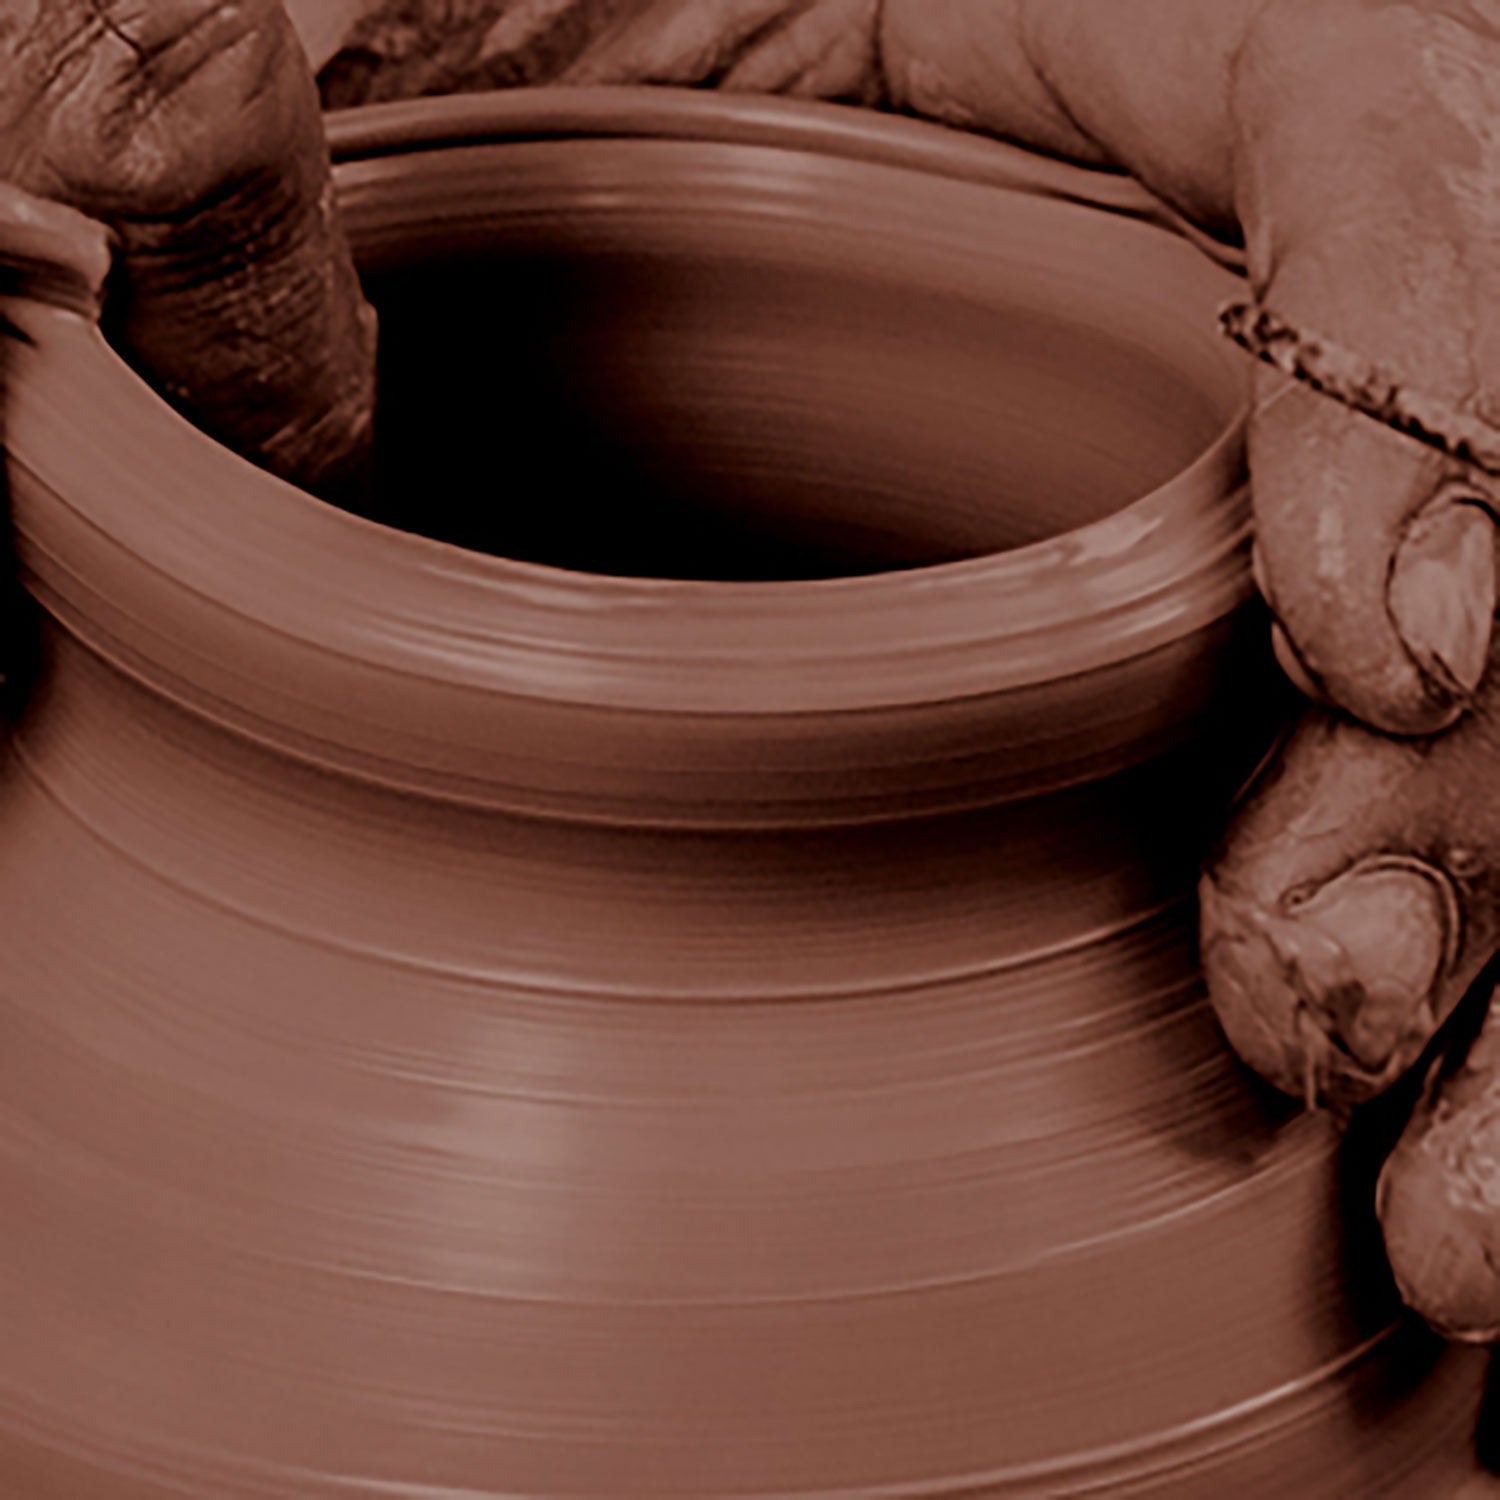 Portuguese artisan giving shape with his hands to traditional terracotta clay pots.